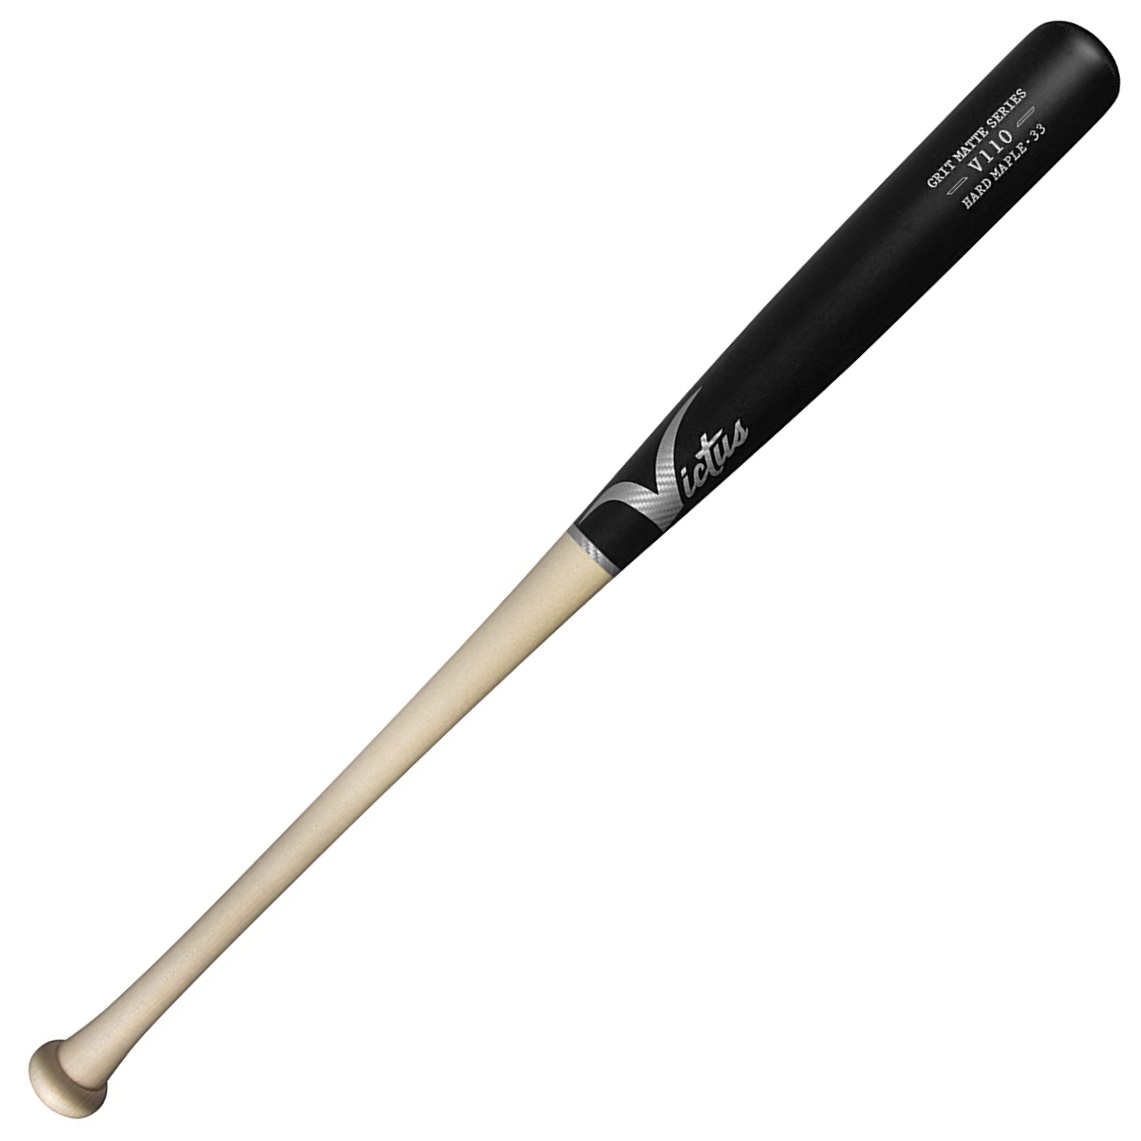 Balance is the name of the game with this cut. The V110 has a small knob with very little flare leading into a handle slightly thicker than most. The rest of the bat is one long taper that transitions into a good-sized, well balanced barrel. Victus Grit Matte bats are made for grinders. Featuring the same quality wood as our Pro Reserve line, the textured matte finish gives these bats a unique look and feel and has been rumored to grip the ball, creating more backspin. - Approximately -3 length to weight ratio - Balanced Feel - Textured matte finish maple - Big League-grade ink dot certified - Knob: Traditional - Handle: Medium - Barrel: Medium - NO warranty